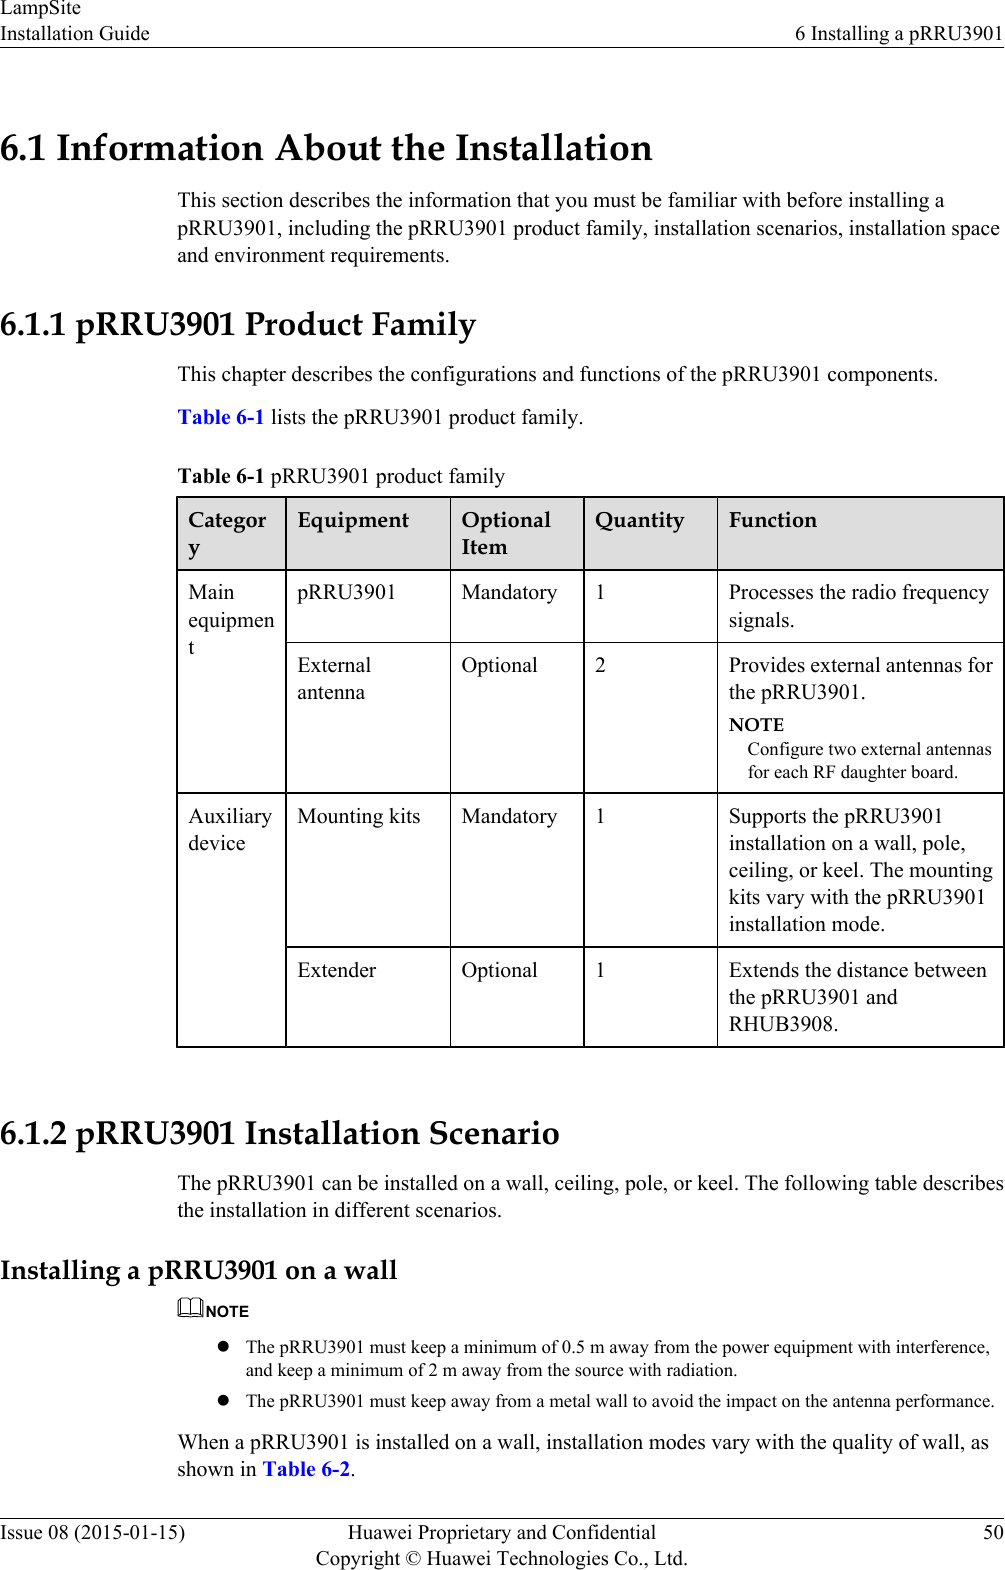 6.1 Information About the InstallationThis section describes the information that you must be familiar with before installing apRRU3901, including the pRRU3901 product family, installation scenarios, installation spaceand environment requirements.6.1.1 pRRU3901 Product FamilyThis chapter describes the configurations and functions of the pRRU3901 components.Table 6-1 lists the pRRU3901 product family.Table 6-1 pRRU3901 product familyCategoryEquipment OptionalItemQuantity FunctionMainequipmentpRRU3901 Mandatory 1 Processes the radio frequencysignals.ExternalantennaOptional 2 Provides external antennas forthe pRRU3901.NOTEConfigure two external antennasfor each RF daughter board.AuxiliarydeviceMounting kits Mandatory 1 Supports the pRRU3901installation on a wall, pole,ceiling, or keel. The mountingkits vary with the pRRU3901installation mode.Extender Optional 1 Extends the distance betweenthe pRRU3901 andRHUB3908. 6.1.2 pRRU3901 Installation ScenarioThe pRRU3901 can be installed on a wall, ceiling, pole, or keel. The following table describesthe installation in different scenarios.Installing a pRRU3901 on a wallNOTElThe pRRU3901 must keep a minimum of 0.5 m away from the power equipment with interference,and keep a minimum of 2 m away from the source with radiation.lThe pRRU3901 must keep away from a metal wall to avoid the impact on the antenna performance.When a pRRU3901 is installed on a wall, installation modes vary with the quality of wall, asshown in Table 6-2.LampSiteInstallation Guide 6 Installing a pRRU3901Issue 08 (2015-01-15) Huawei Proprietary and ConfidentialCopyright © Huawei Technologies Co., Ltd.50